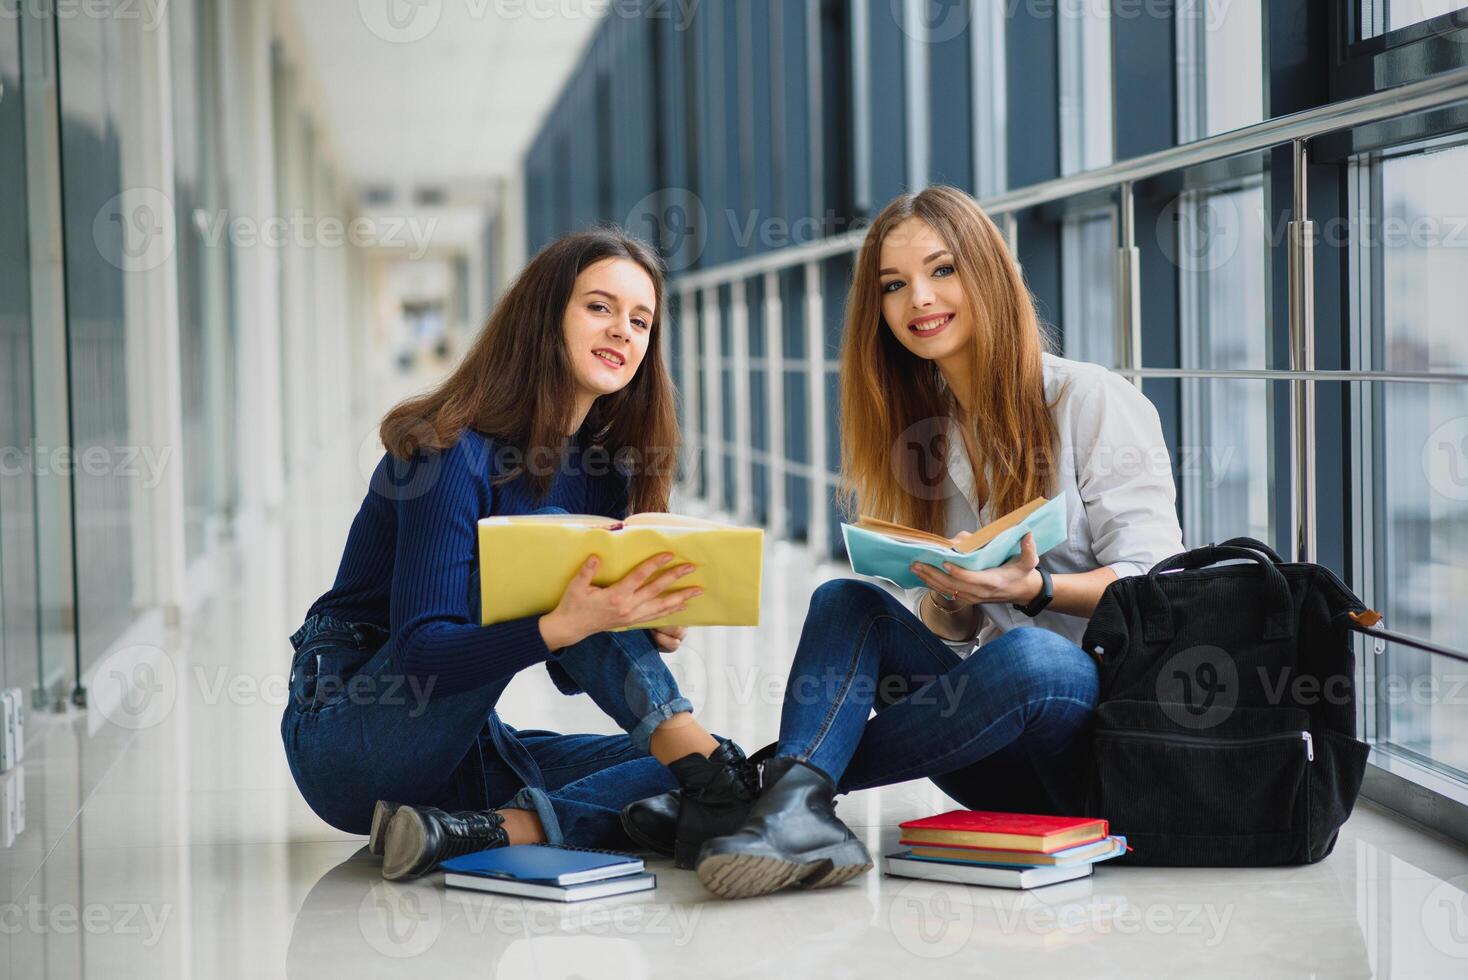 two pretty female students with books sitting on the floor in the university hallway photo